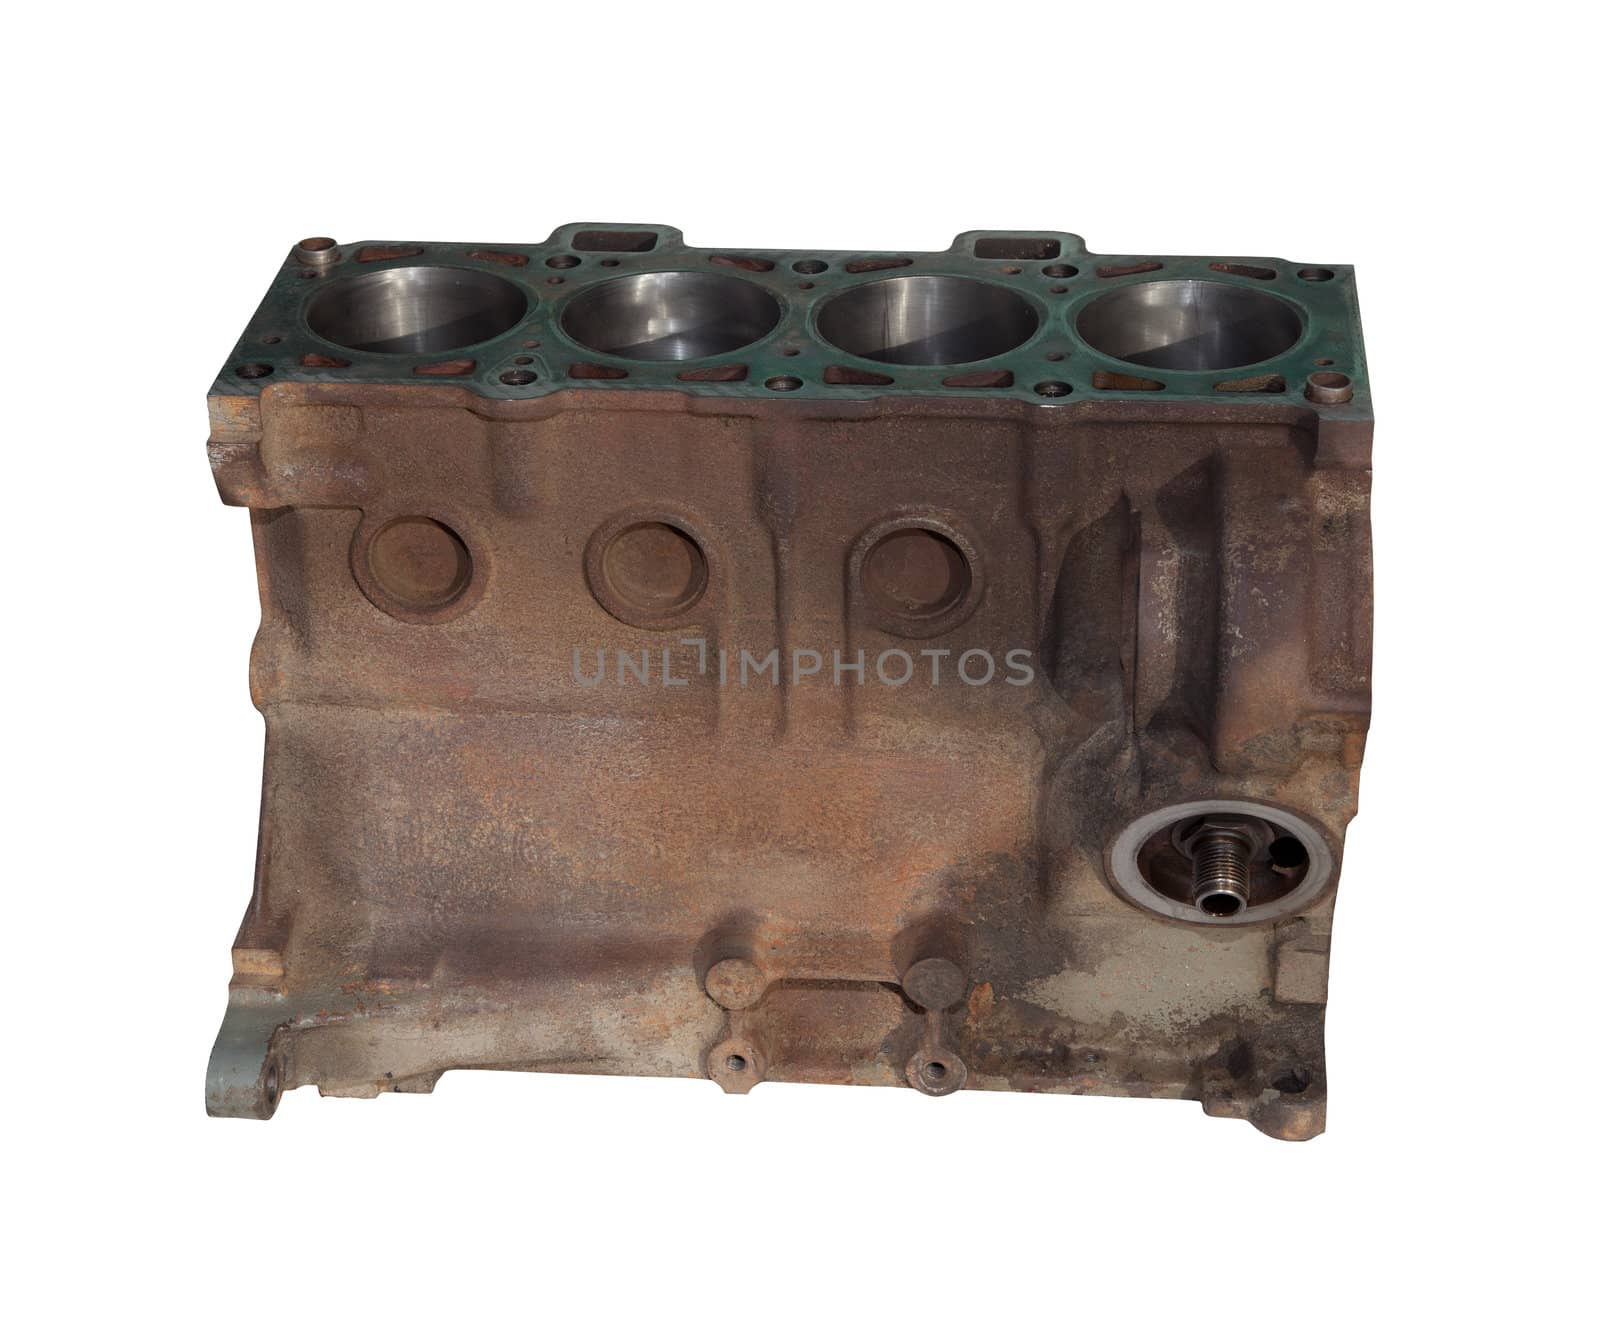 The cylinder head of the engine. Isolated on white background